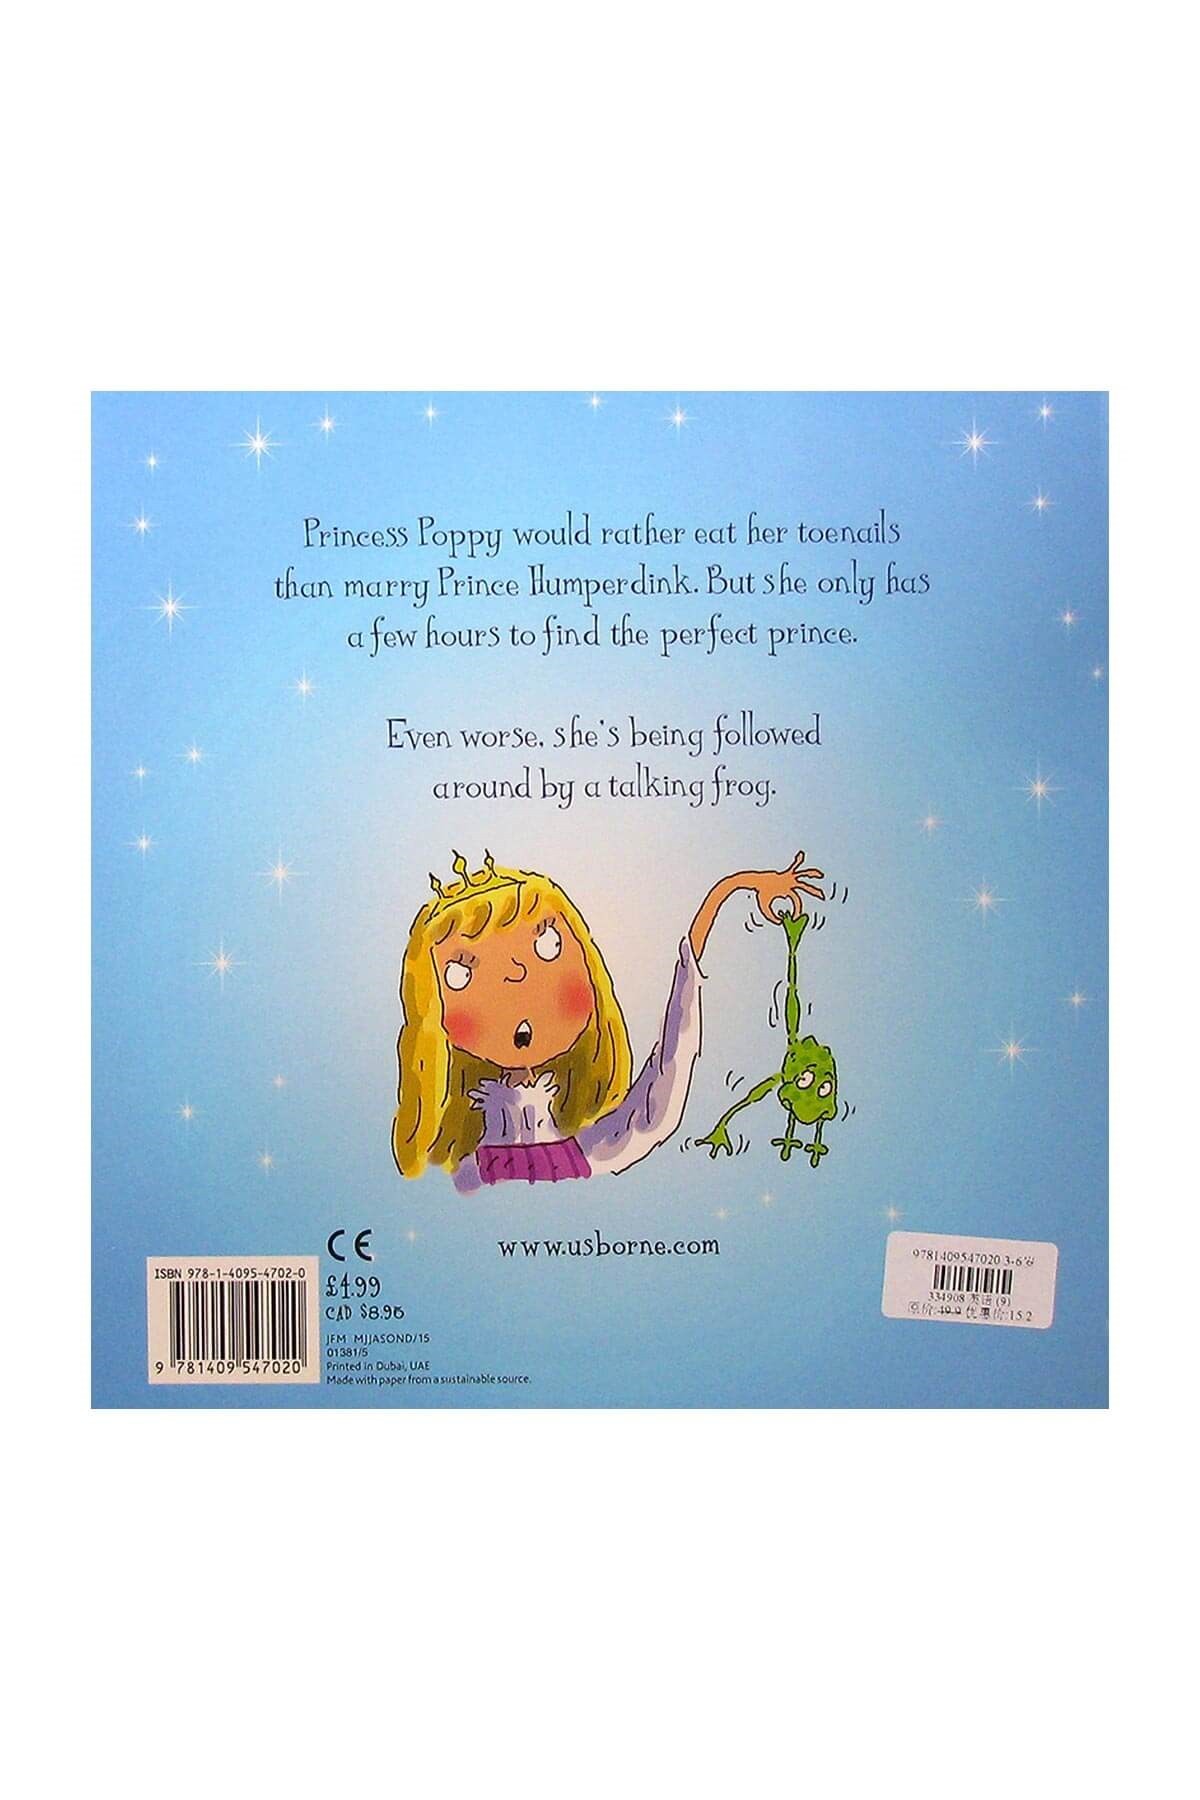 The Usborne Pic The Frog Prince